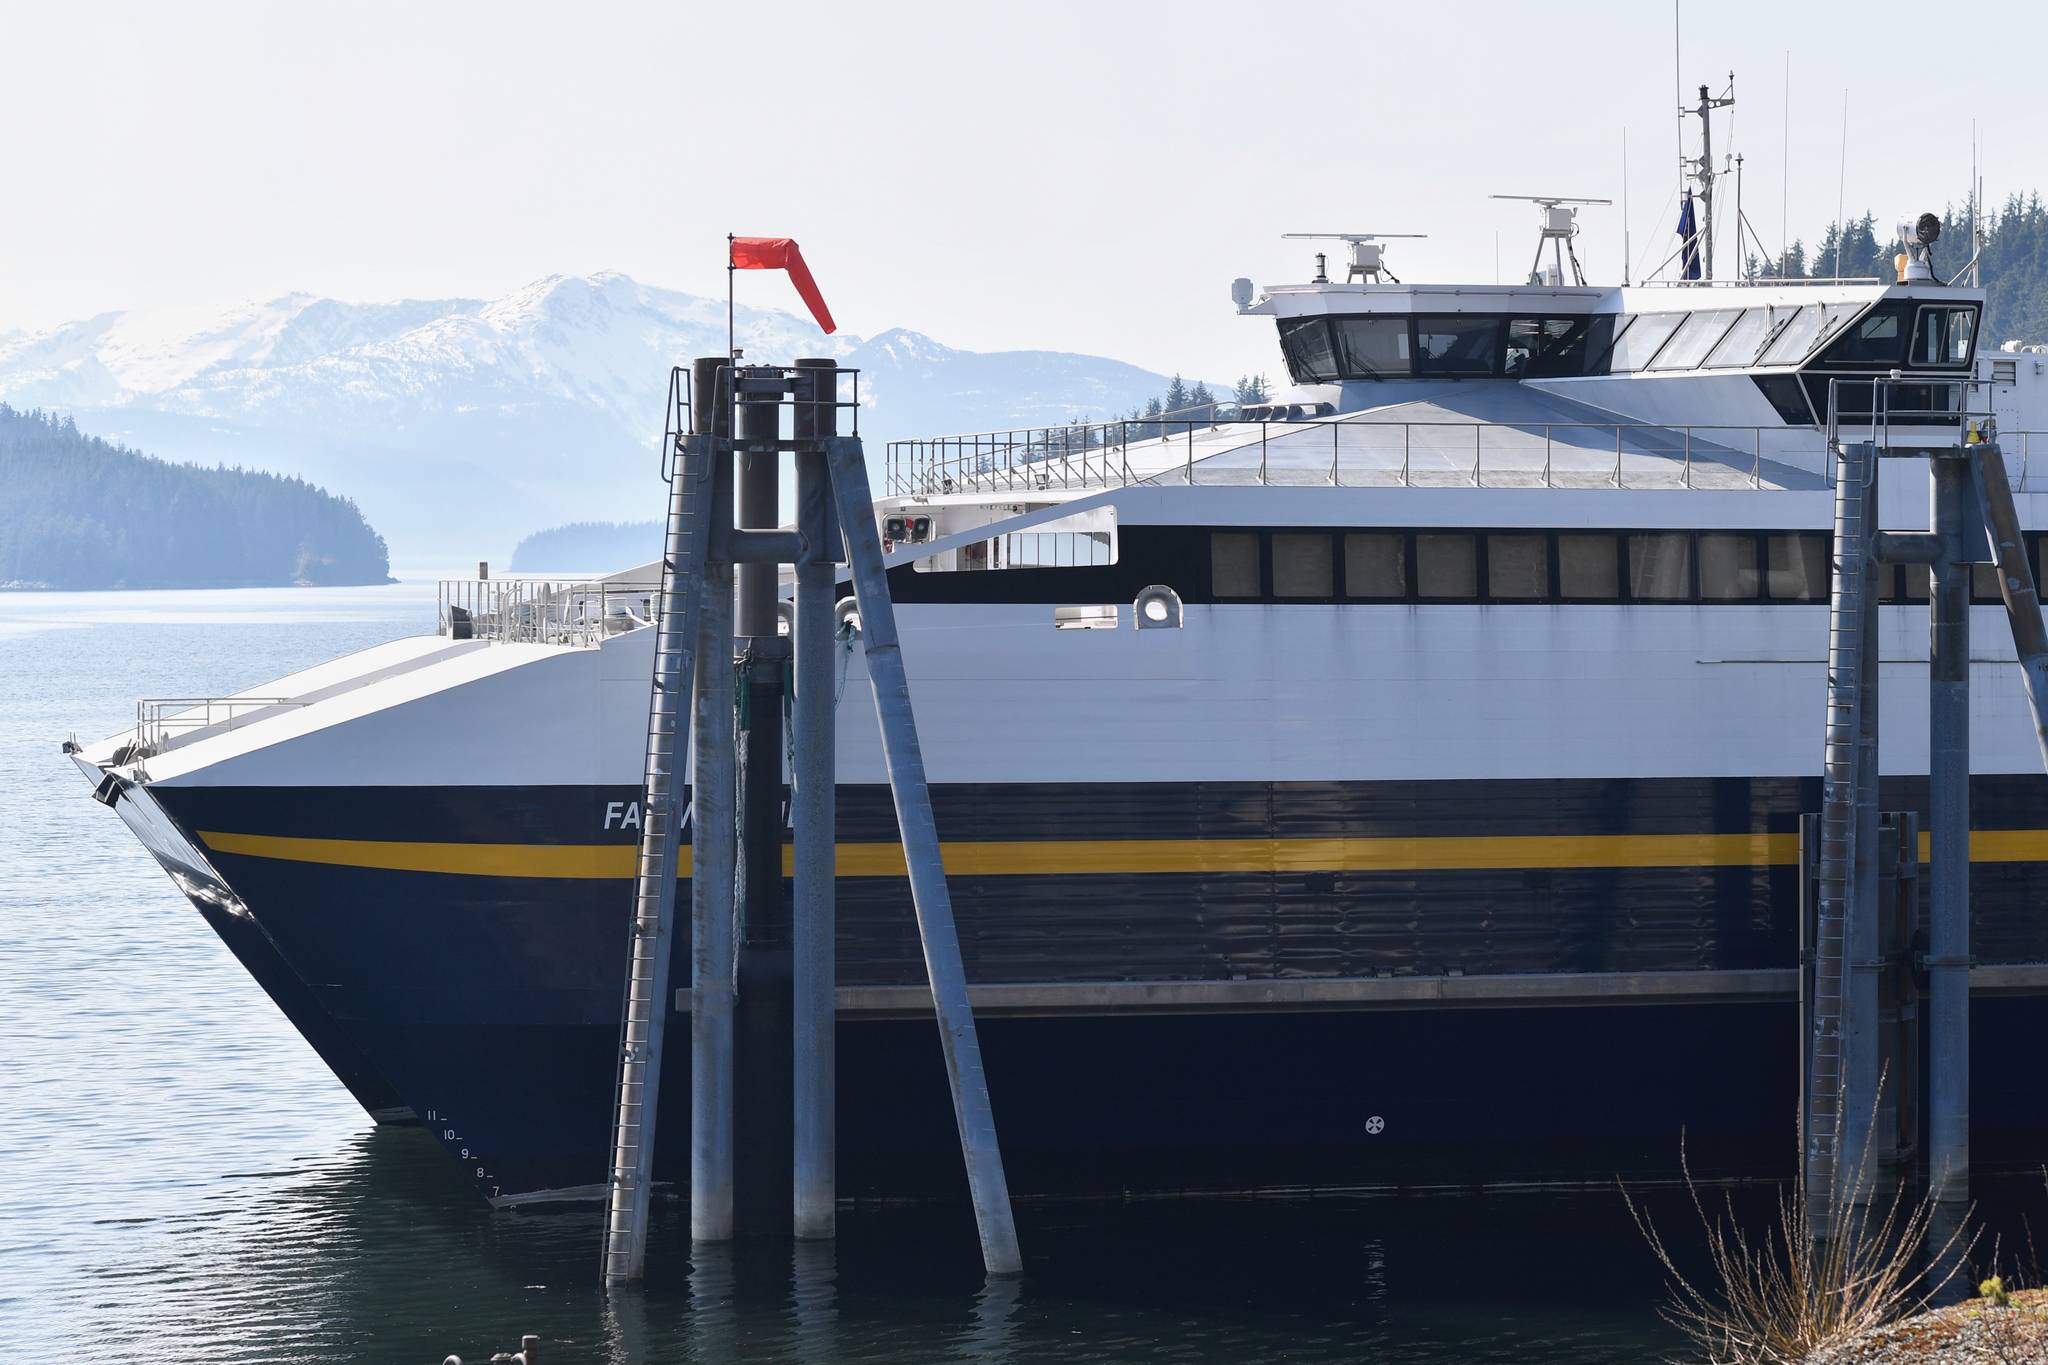 The Alaska Marine Highway System’s fast ferry Fairweather moored at its home terminal in Auke Bay in Tuesday, April 2, 2019. (Michael Penn | Juneau Empire)